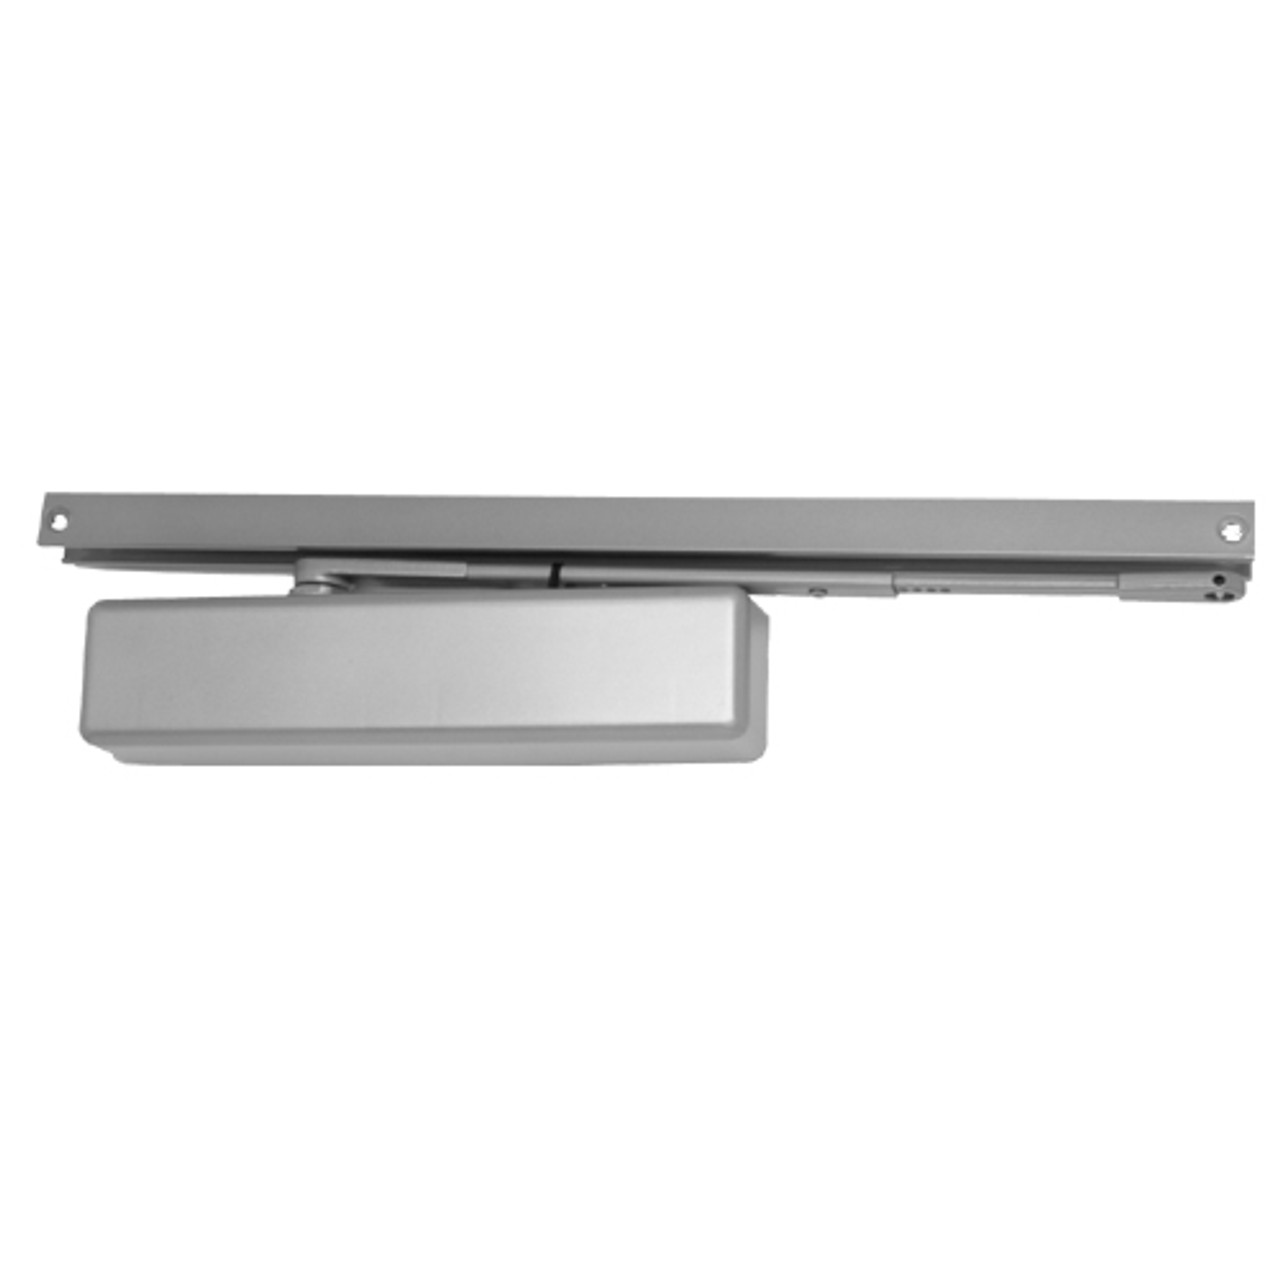 1460T-H-BUMPER-AL-FC LCN Surface Mount Door Closer with Hold Open Track with Bumper in Aluminum Finish